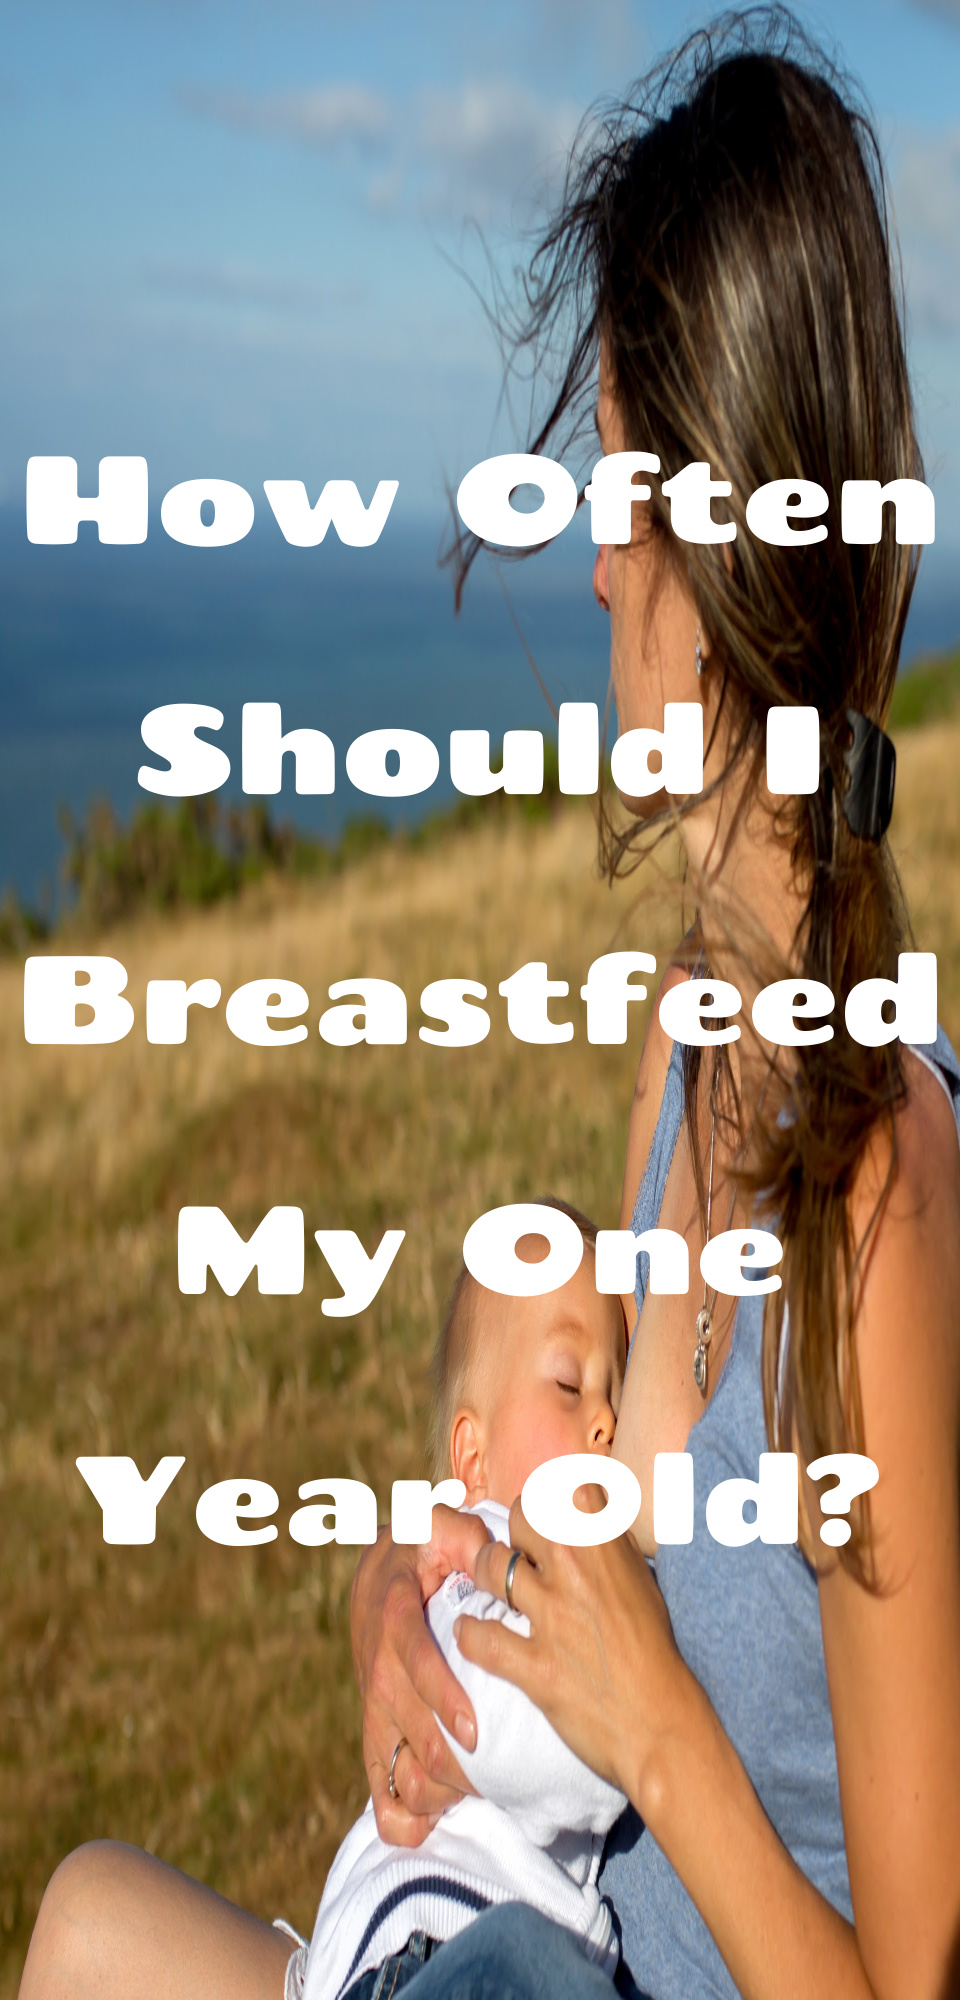 How Often Should You Breastfeed a One Year Old?